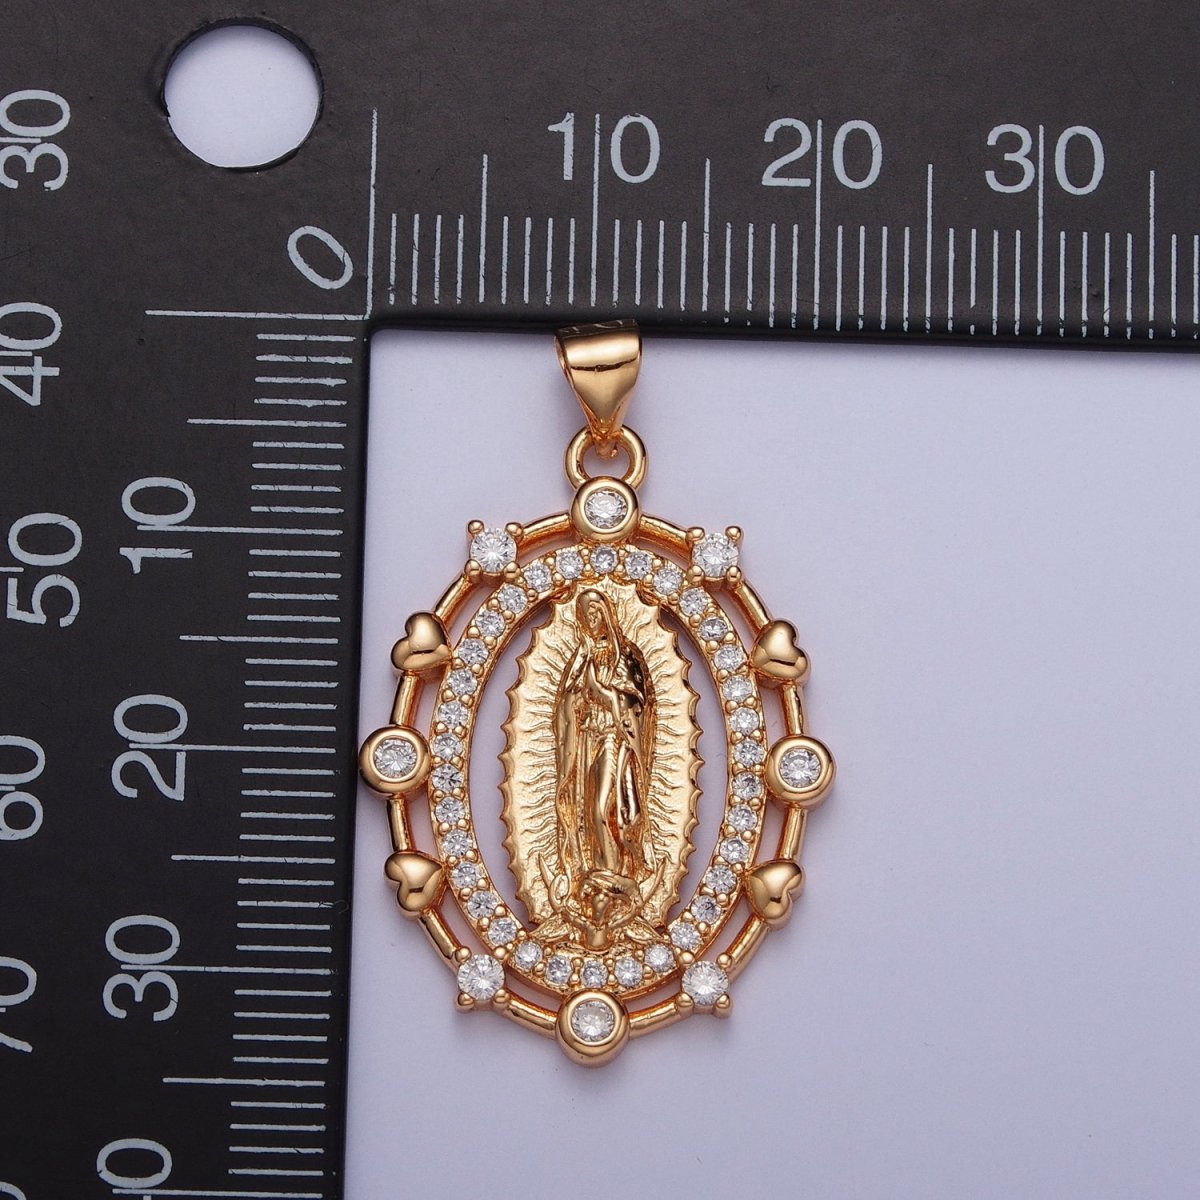 OS 18K Gold Heart Round Micro Paved CZ Lady Guadalupe Virgin Mary Pendant For Religious Jewelry Making H-199 - DLUXCA